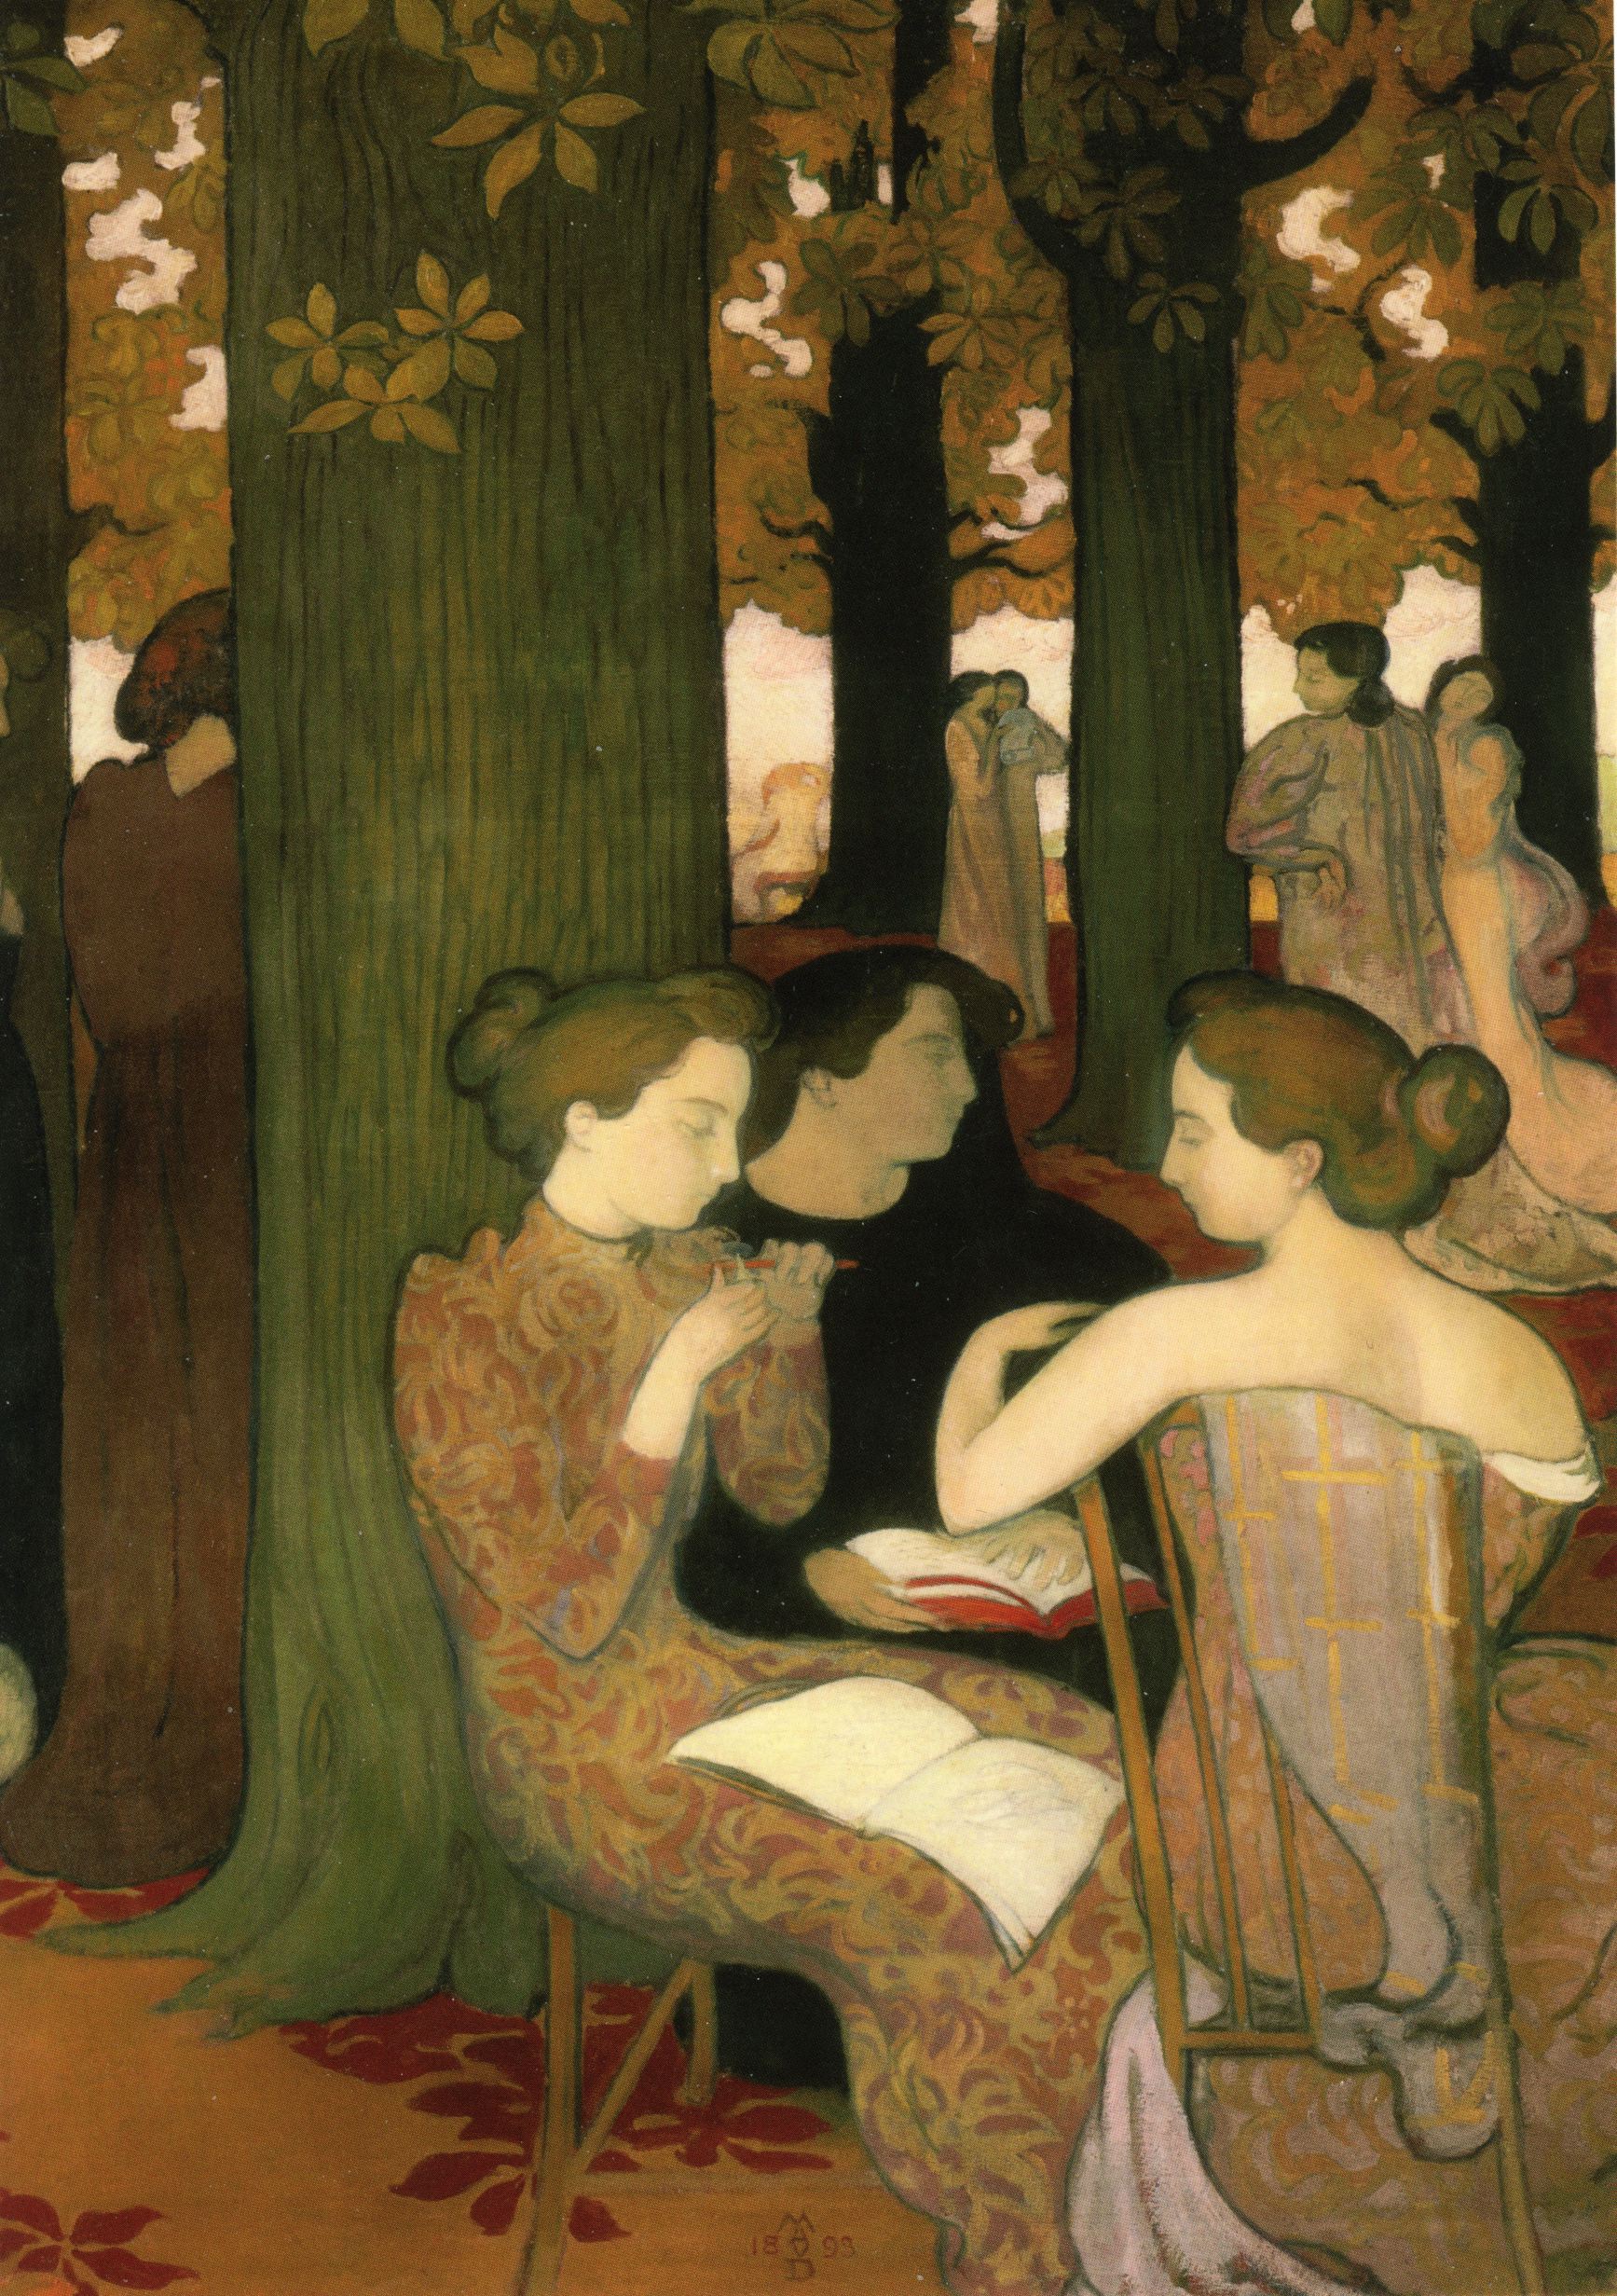 Muses by Maurice Denis - 1893 - 171.5 x 137.5 cm Musée d'Orsay